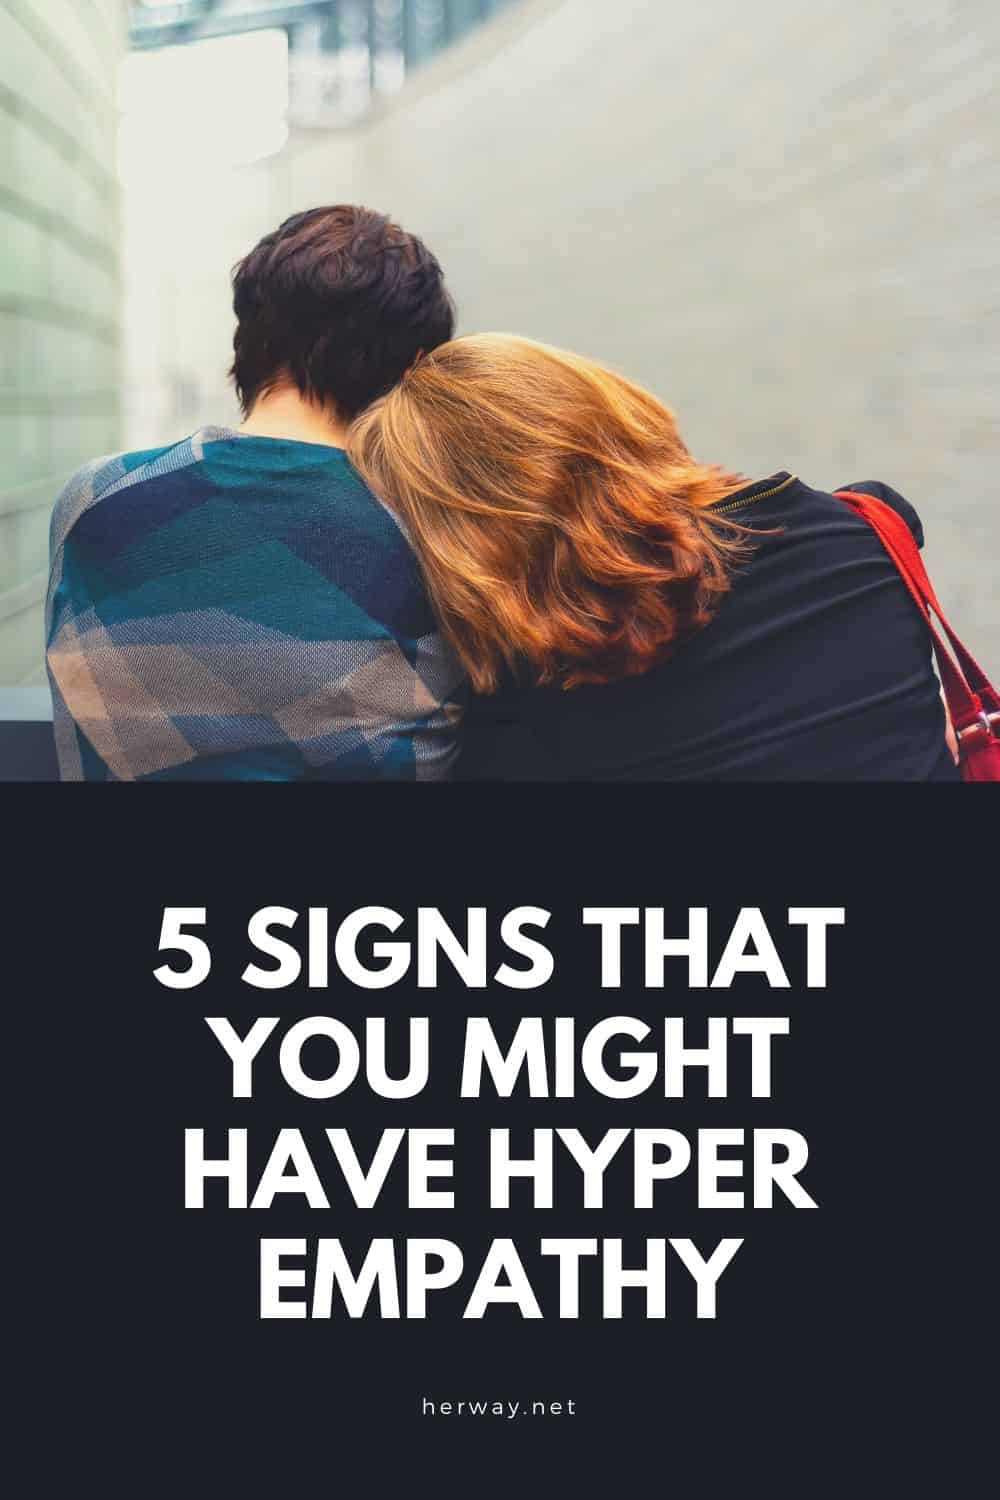 5 Signs That You Might Have Hyper Empathy